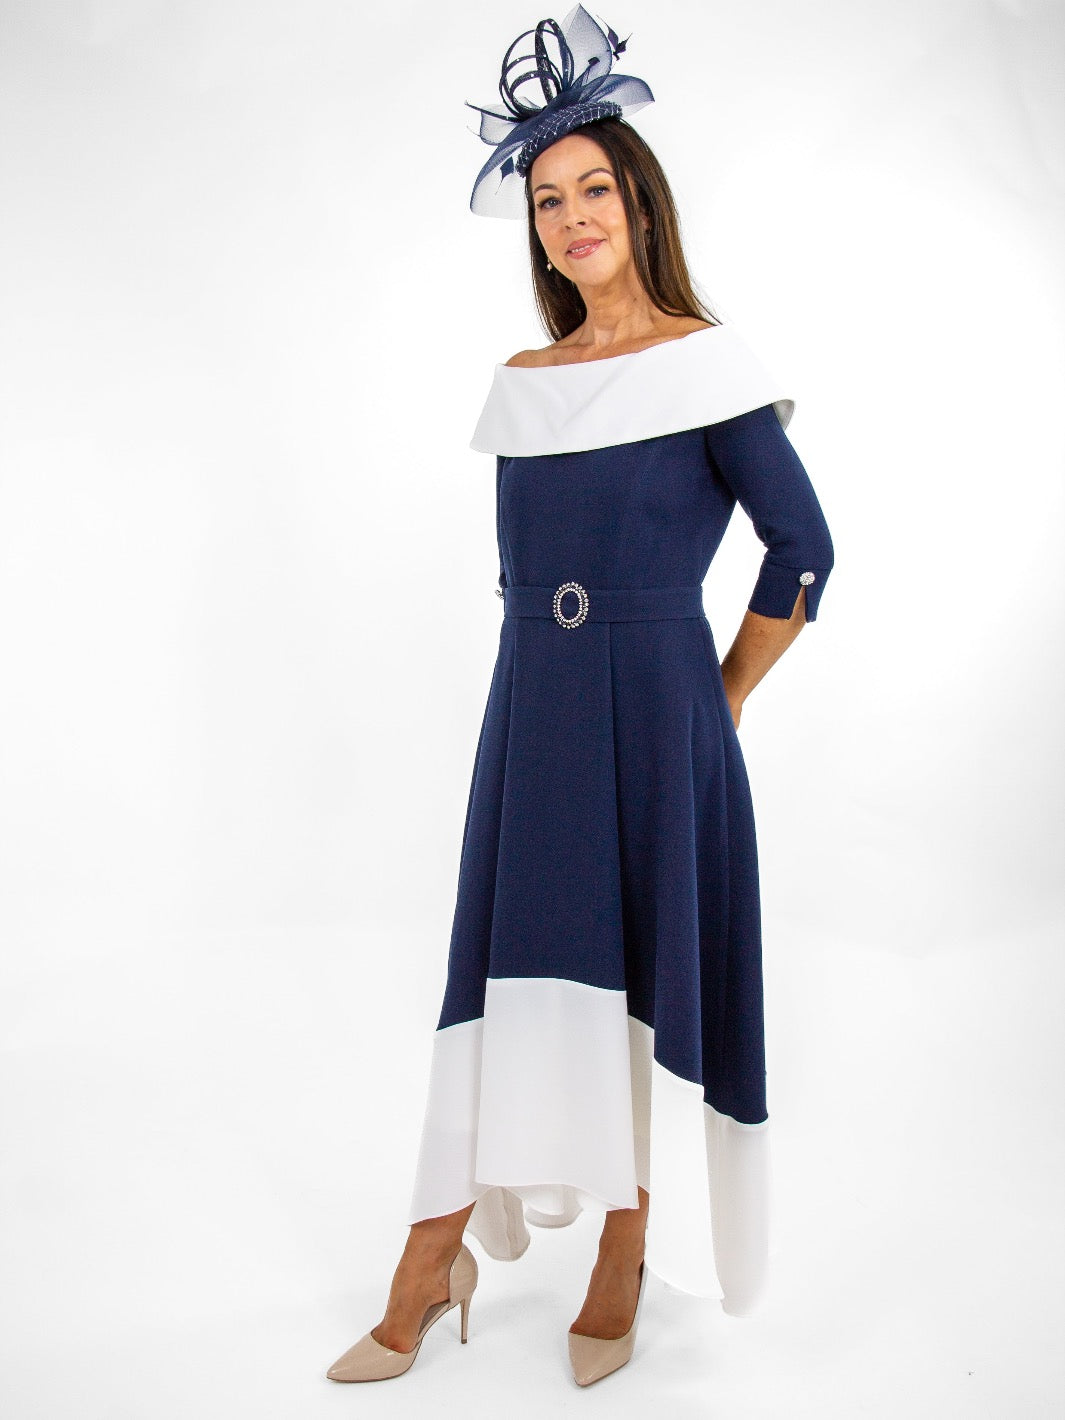 Claudia C Diana Dress In Navy / White-Occasion Wear-Guest of the wedding-Nicola Ross